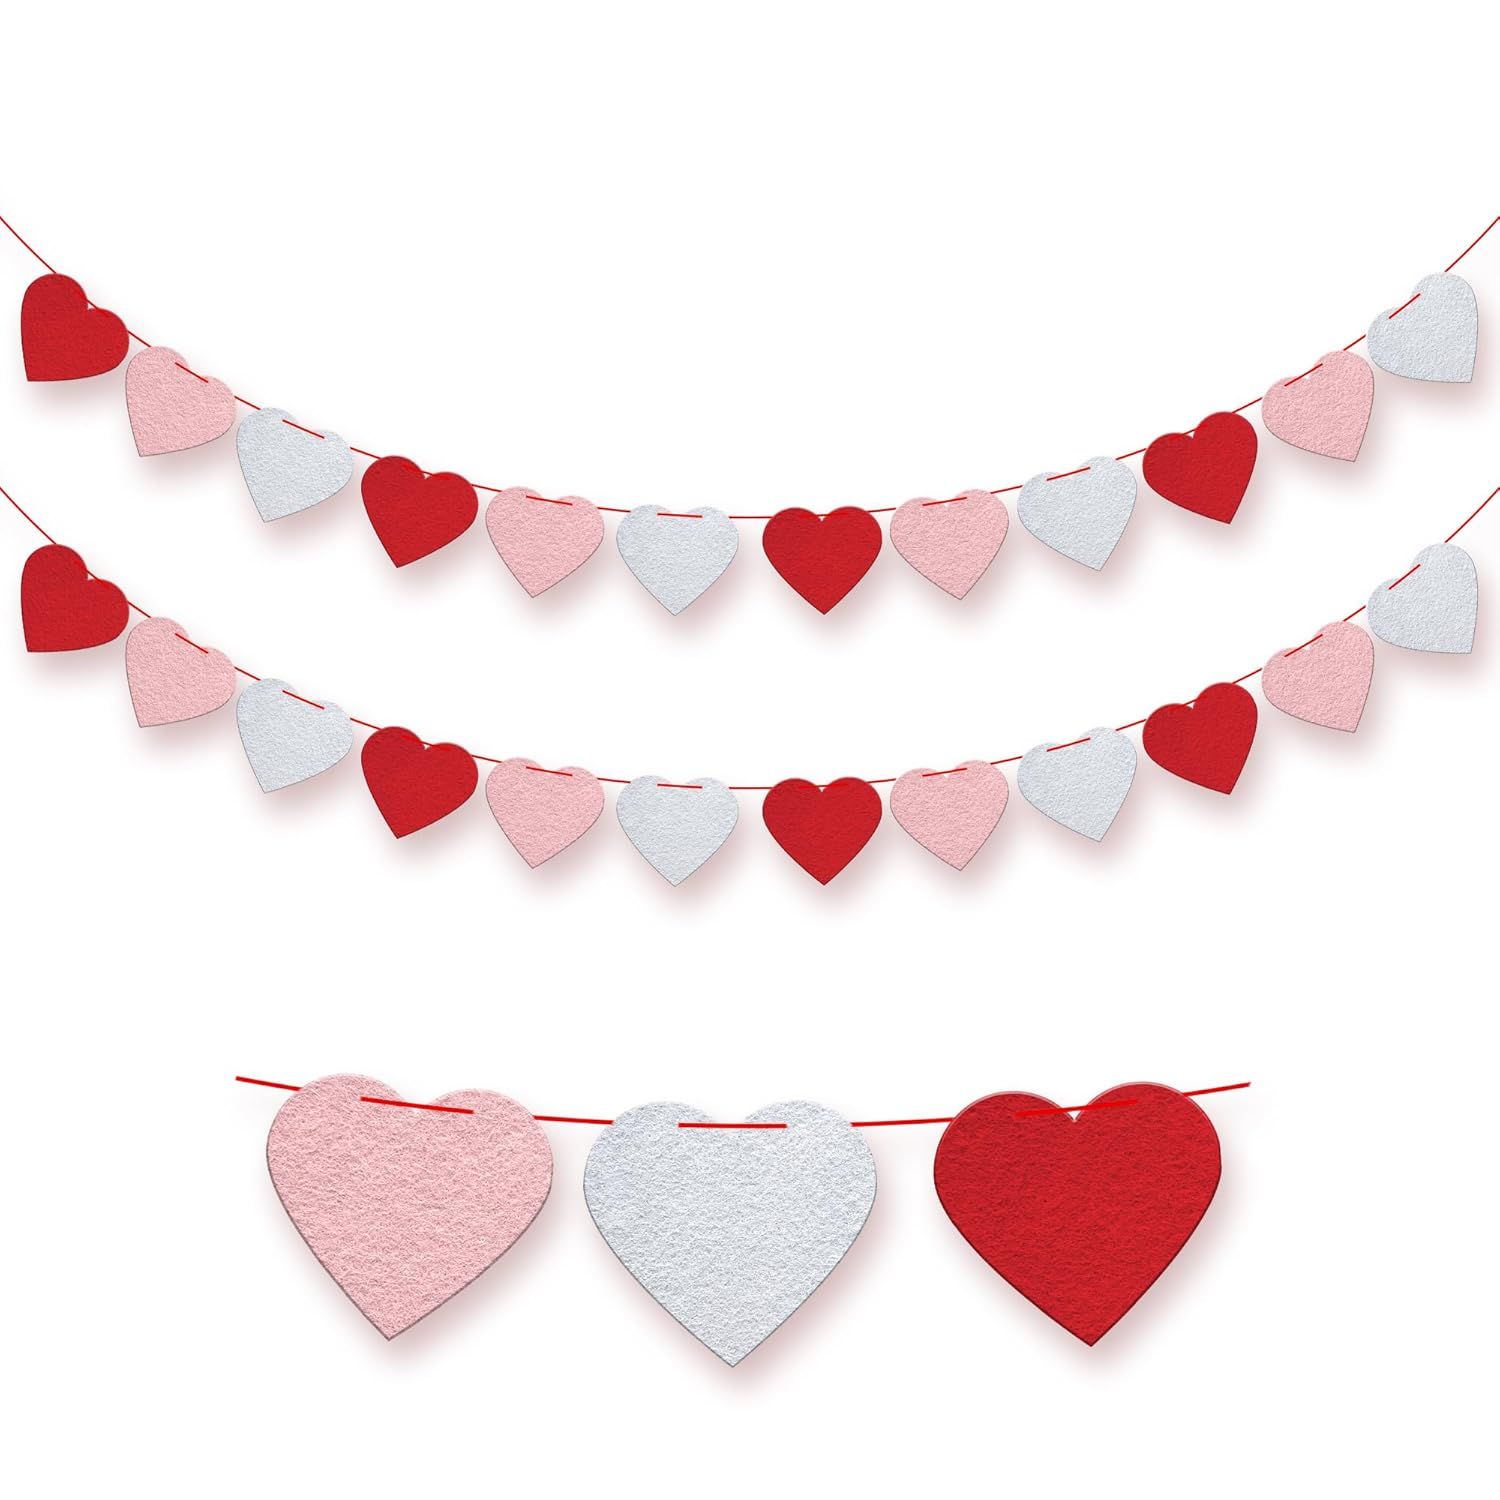 Red Felt Heart Garland Banner - No DIY | Red, White and Pink Heart Valentine Garland for Mantle, ... | Amazon (CA)